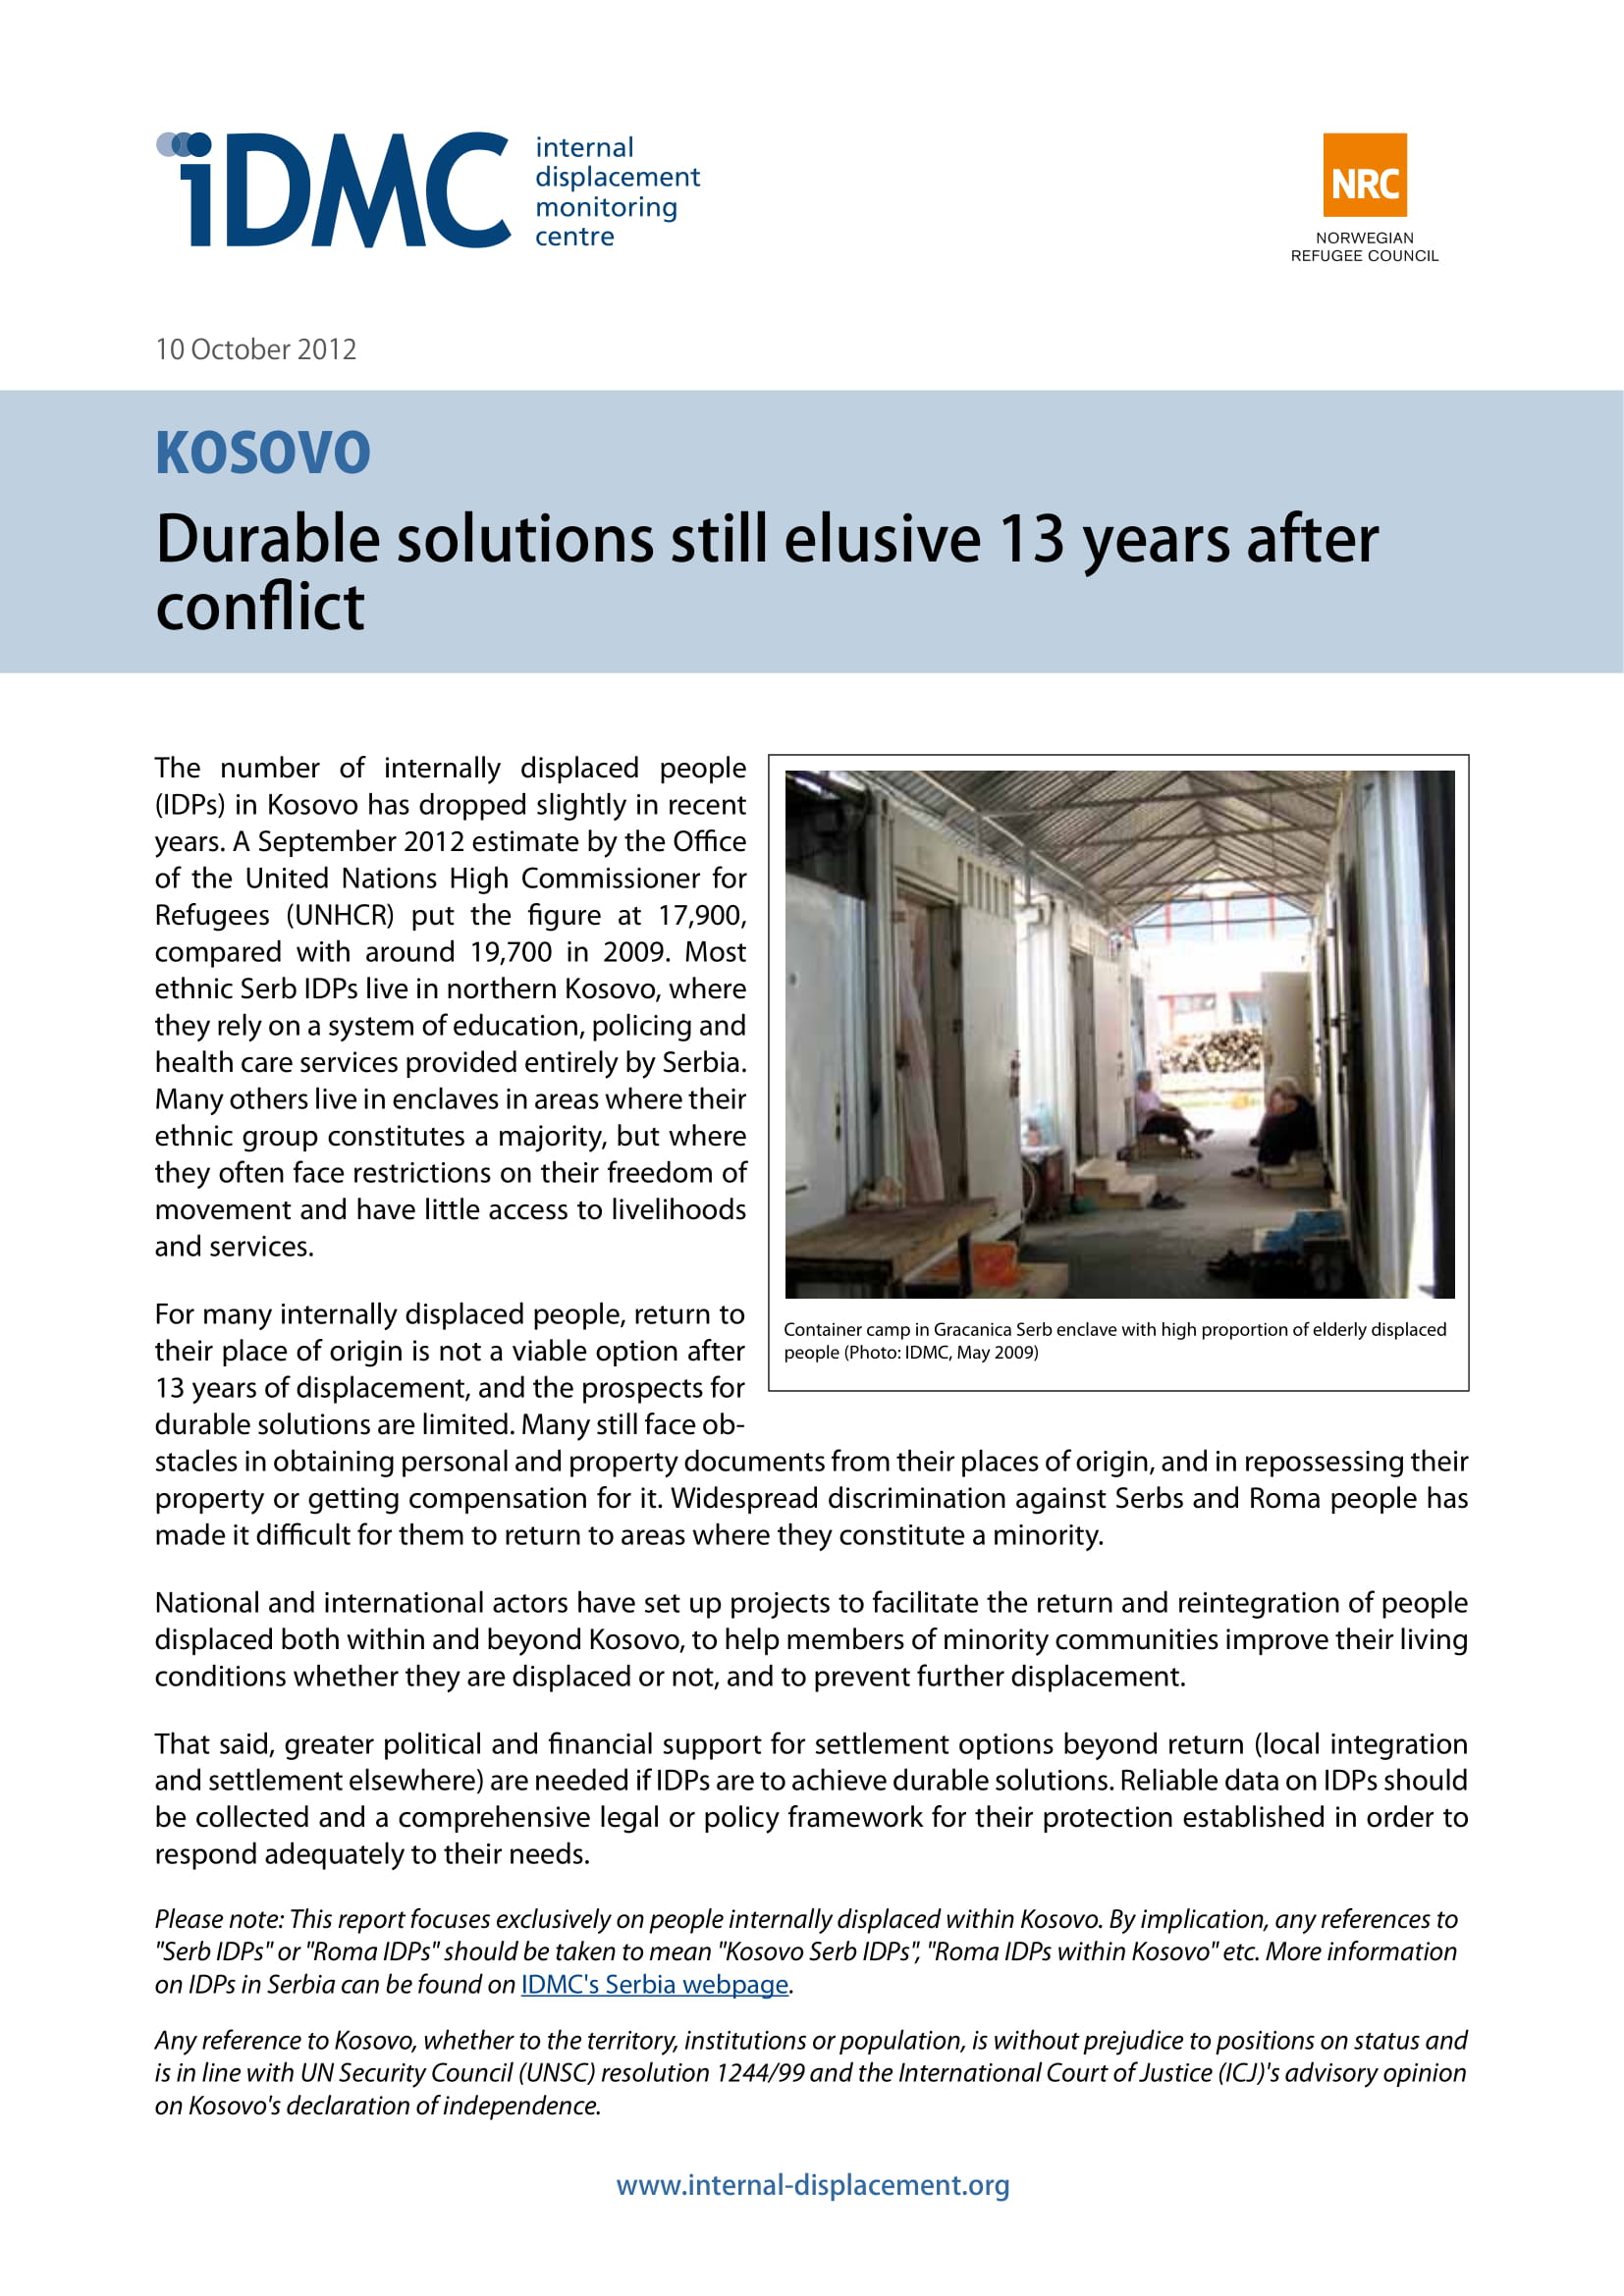 Kosovo: Durable solutions still elusive 13 years after conflict 